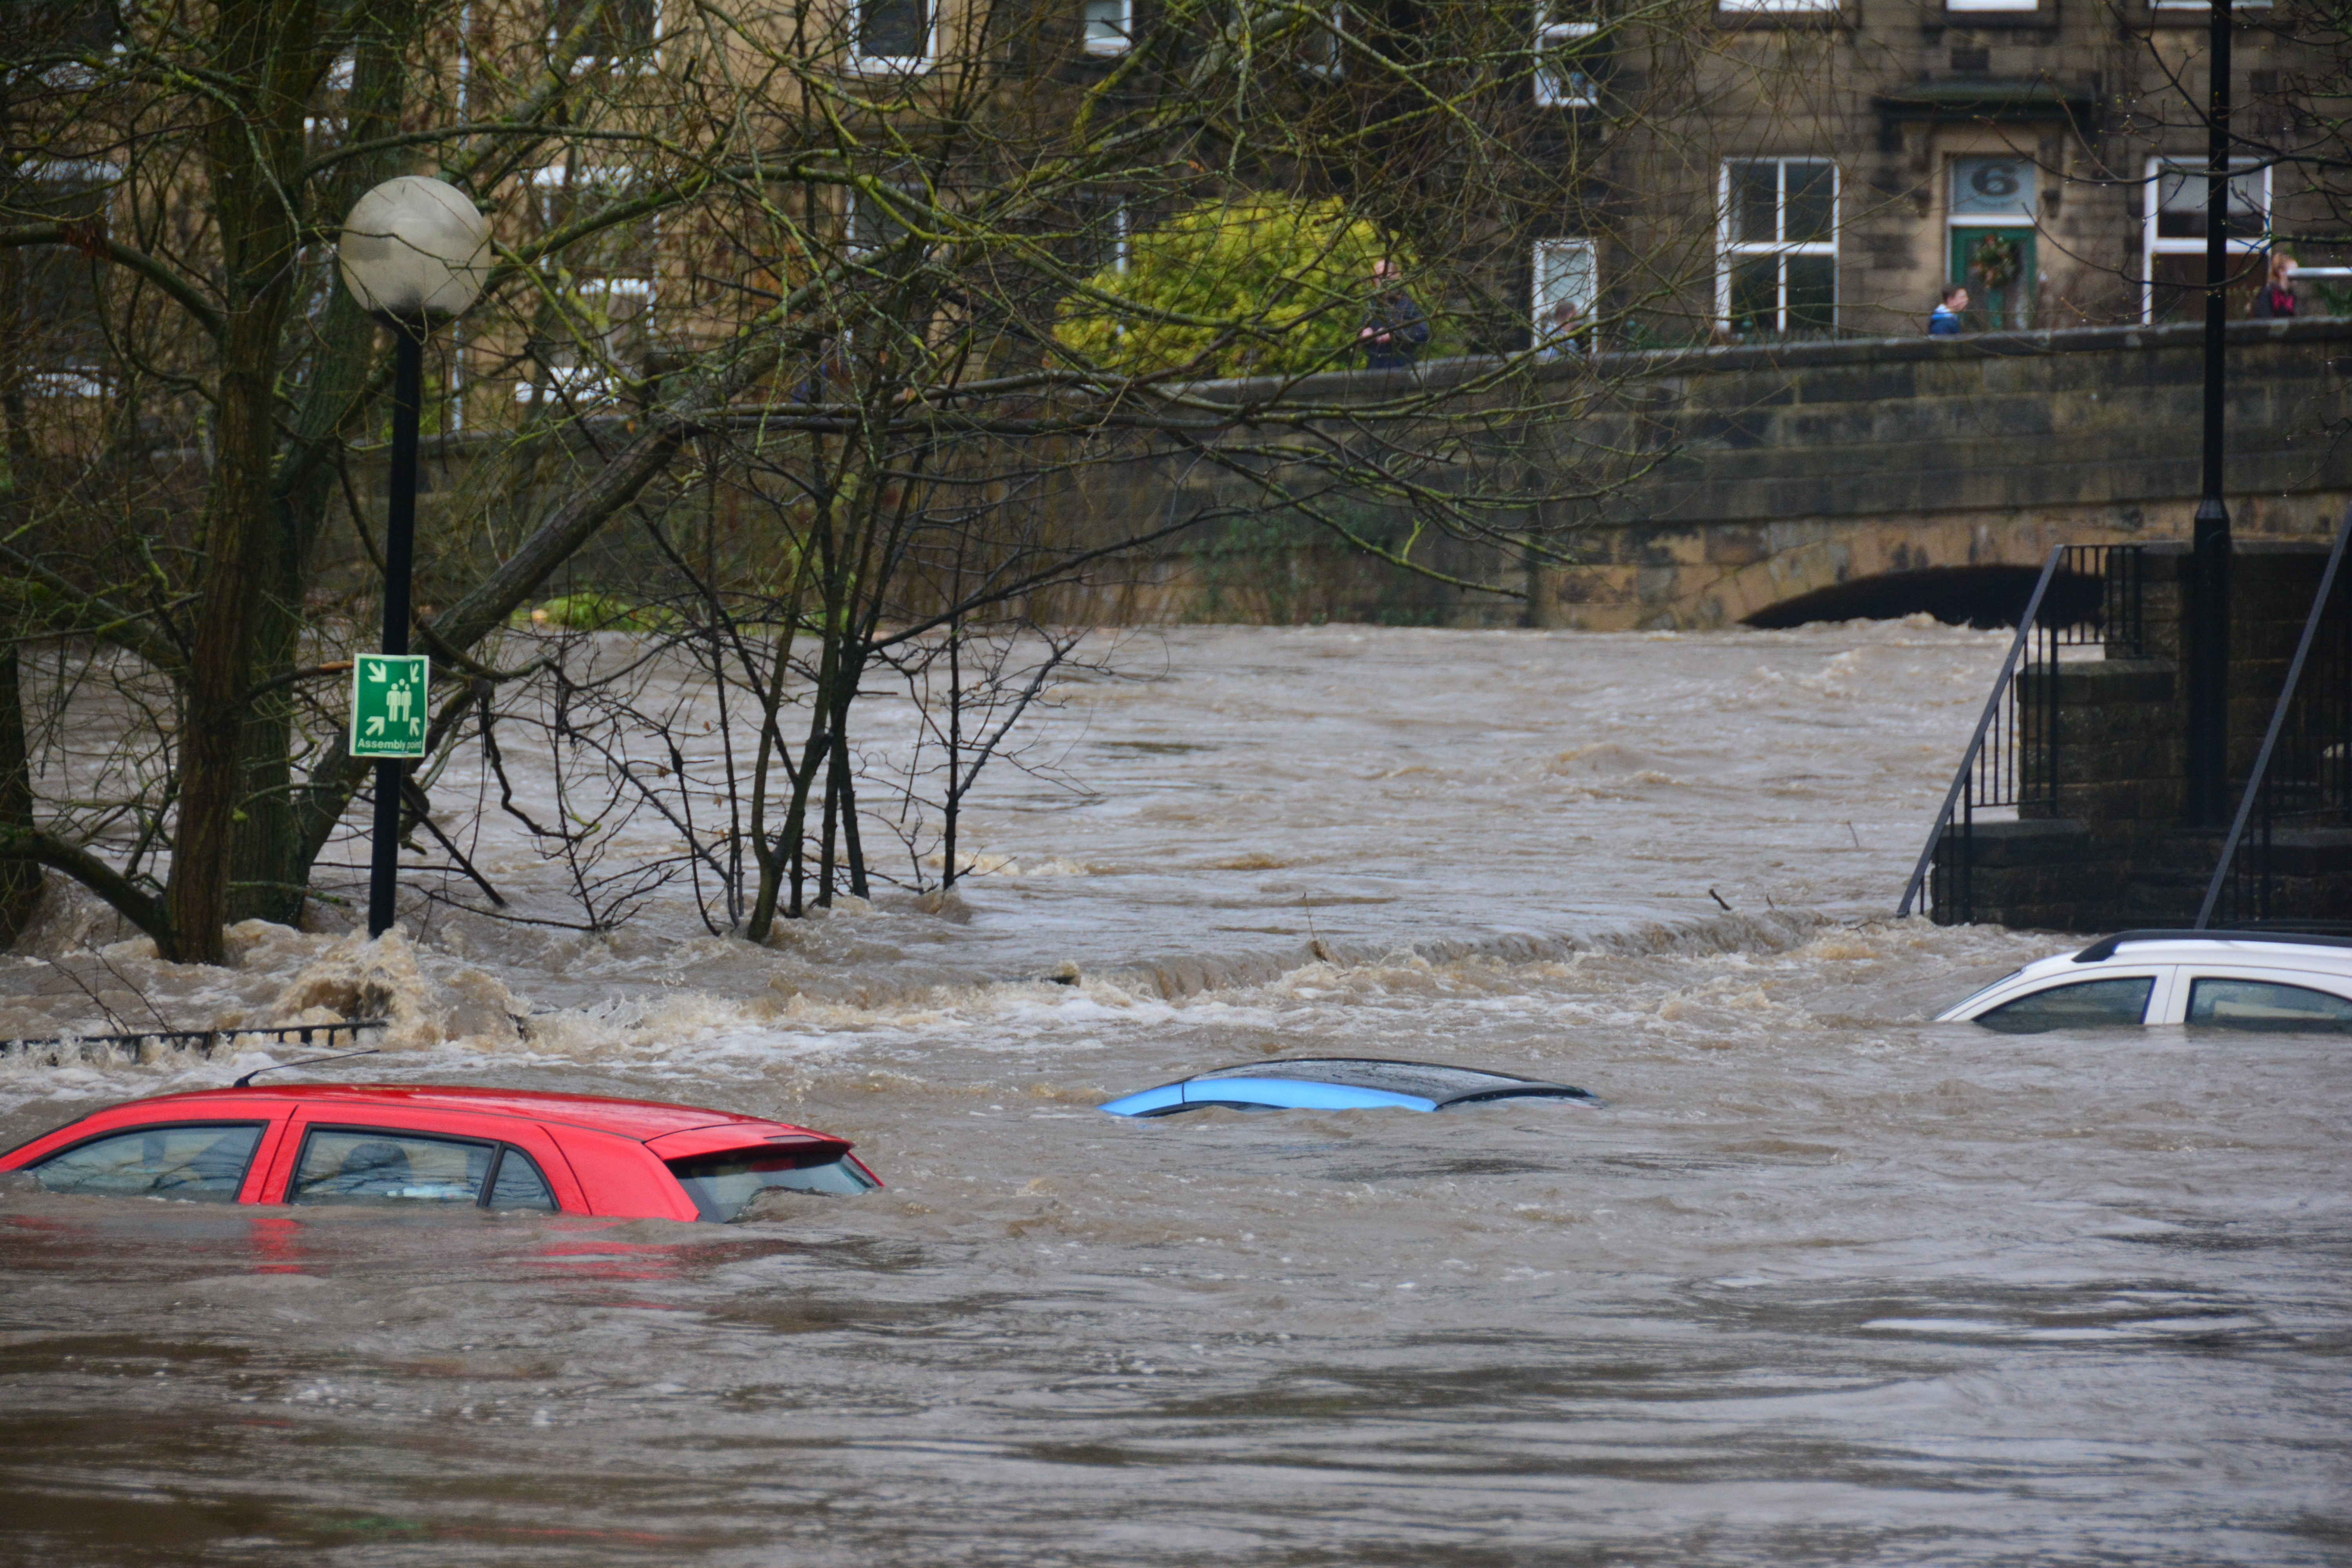 Cars almost underwater during the 2015 Bingley floods.